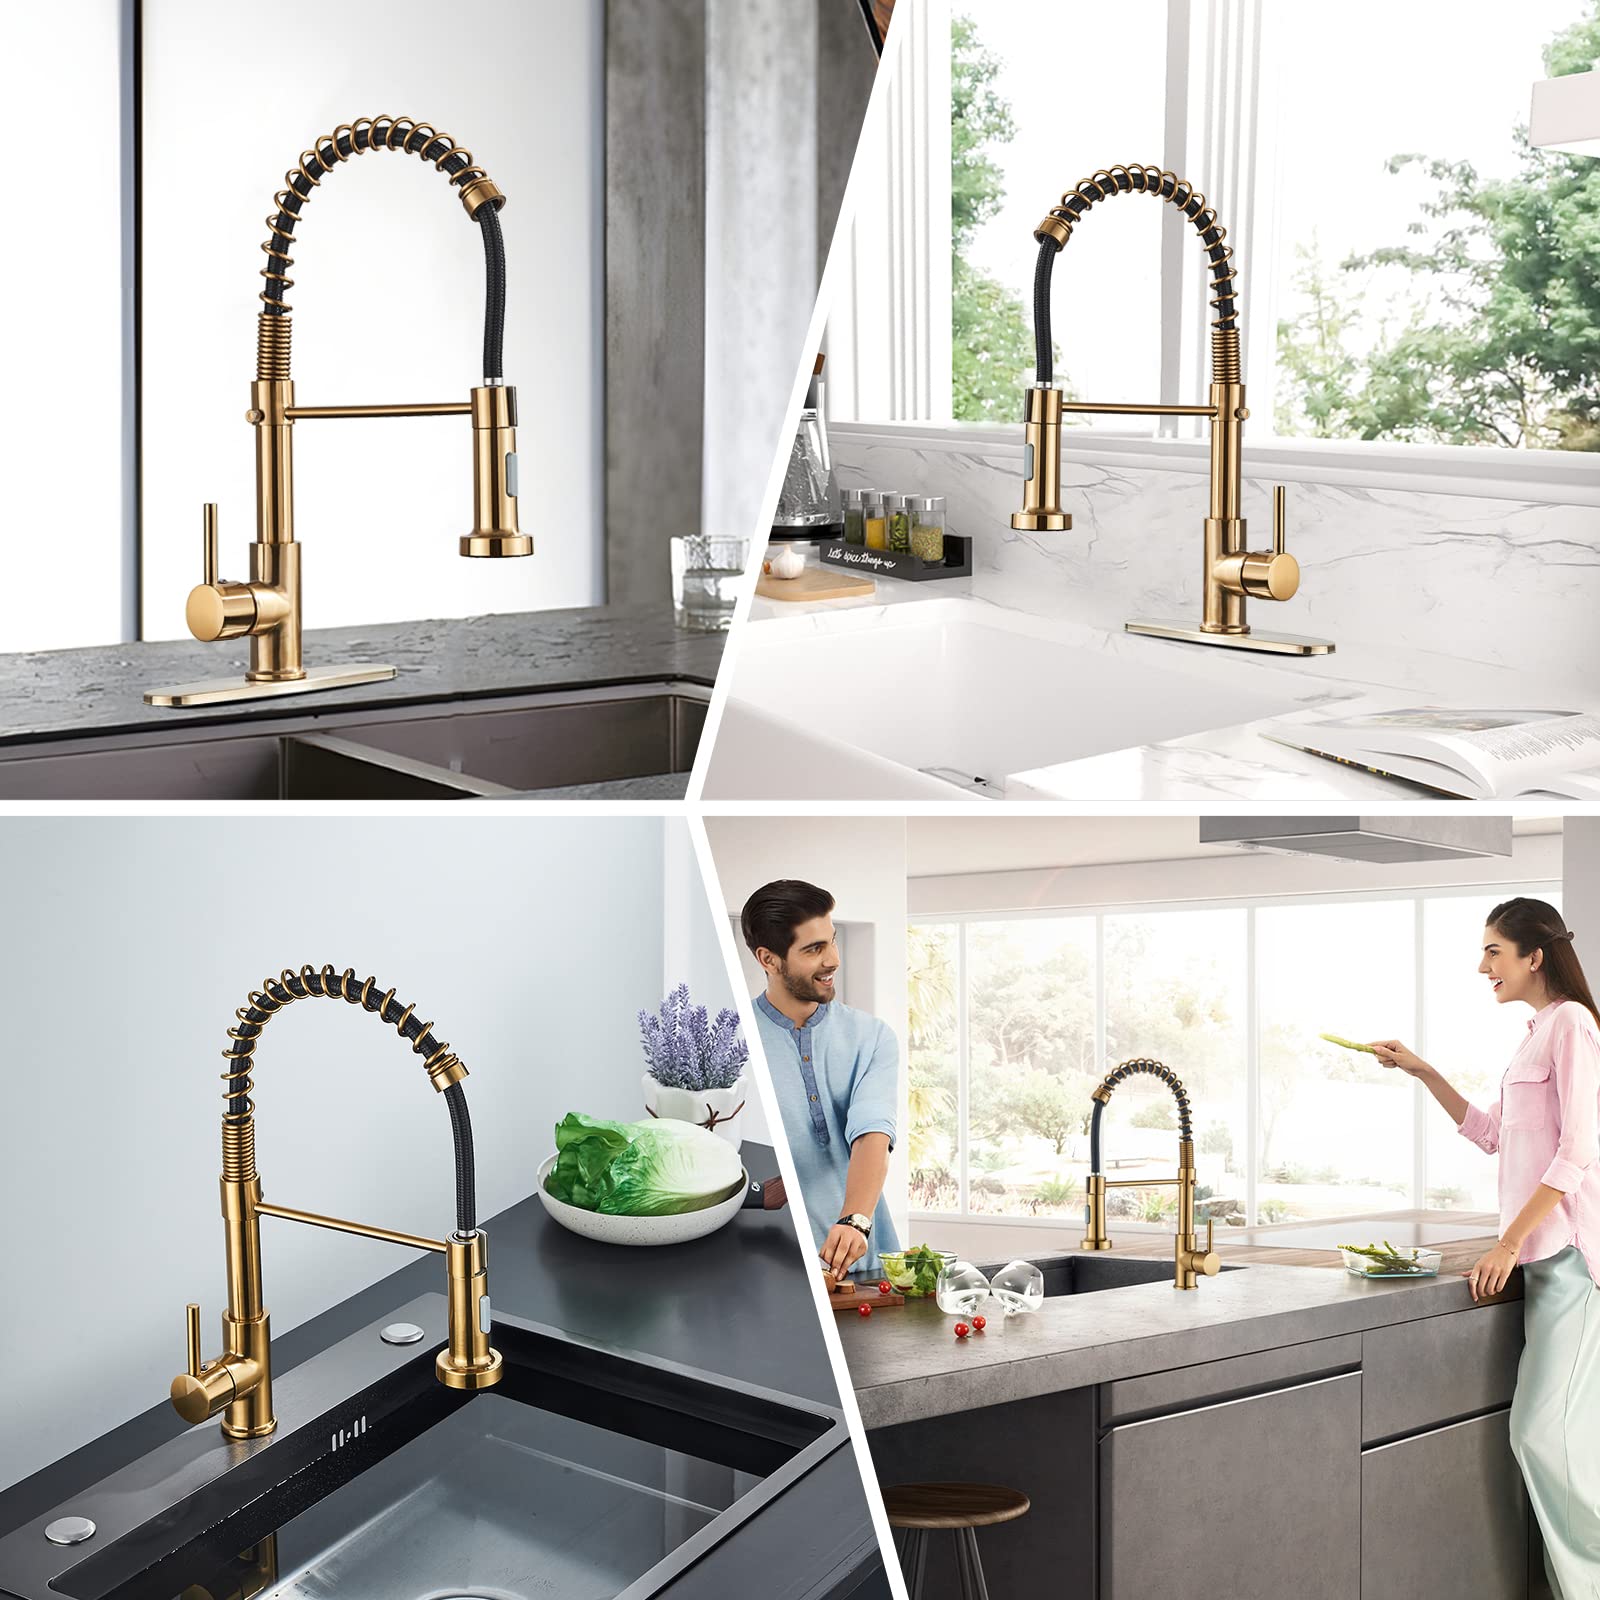 DanPiang Gold Kitchen Faucet,Commercial Stainless Steel Single Handle Pull Down Kitchen Sink Faucet with Deck Plate,Brushed Gold